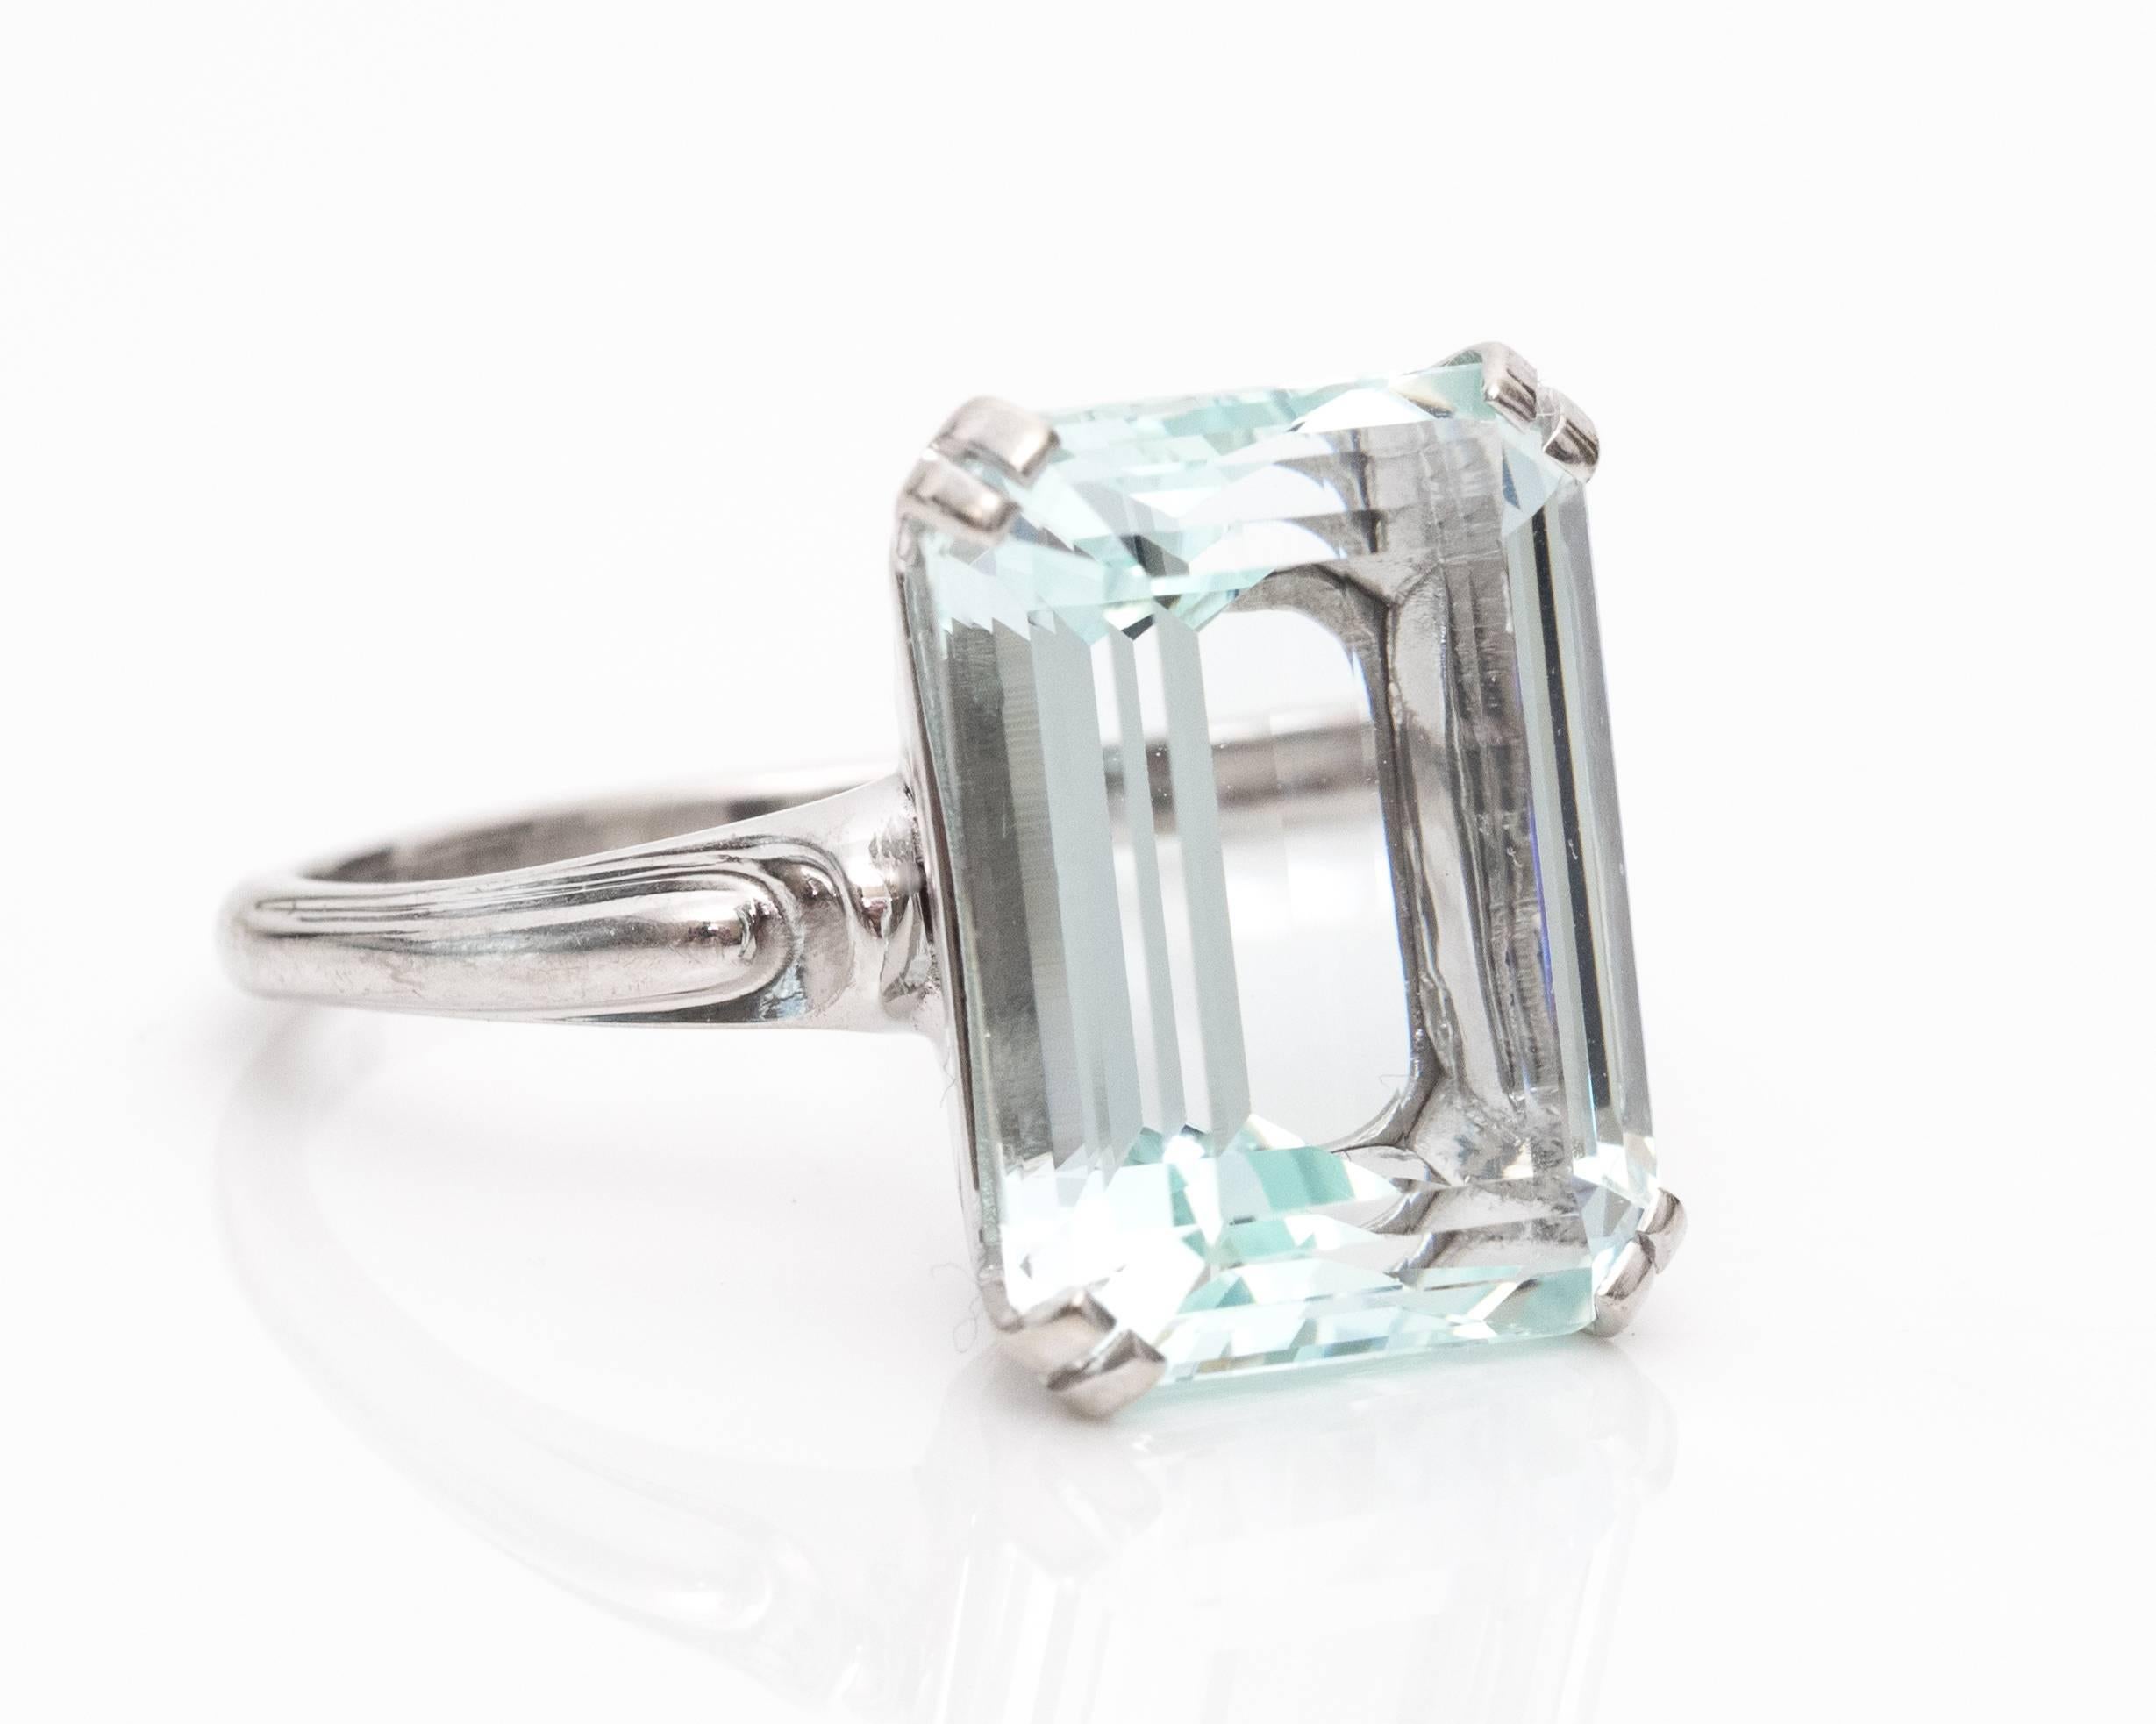 10 Carat Light Blue Aquamarine Ring
14 Karat White Gold Mounting with Four Double Prongs 
Aquamarine is an Emerald Cut Stone
Ornate Appearance
Set high, similar to a cathedral high mount setting

Fits Ring size 9.75, and can be resized with ease.